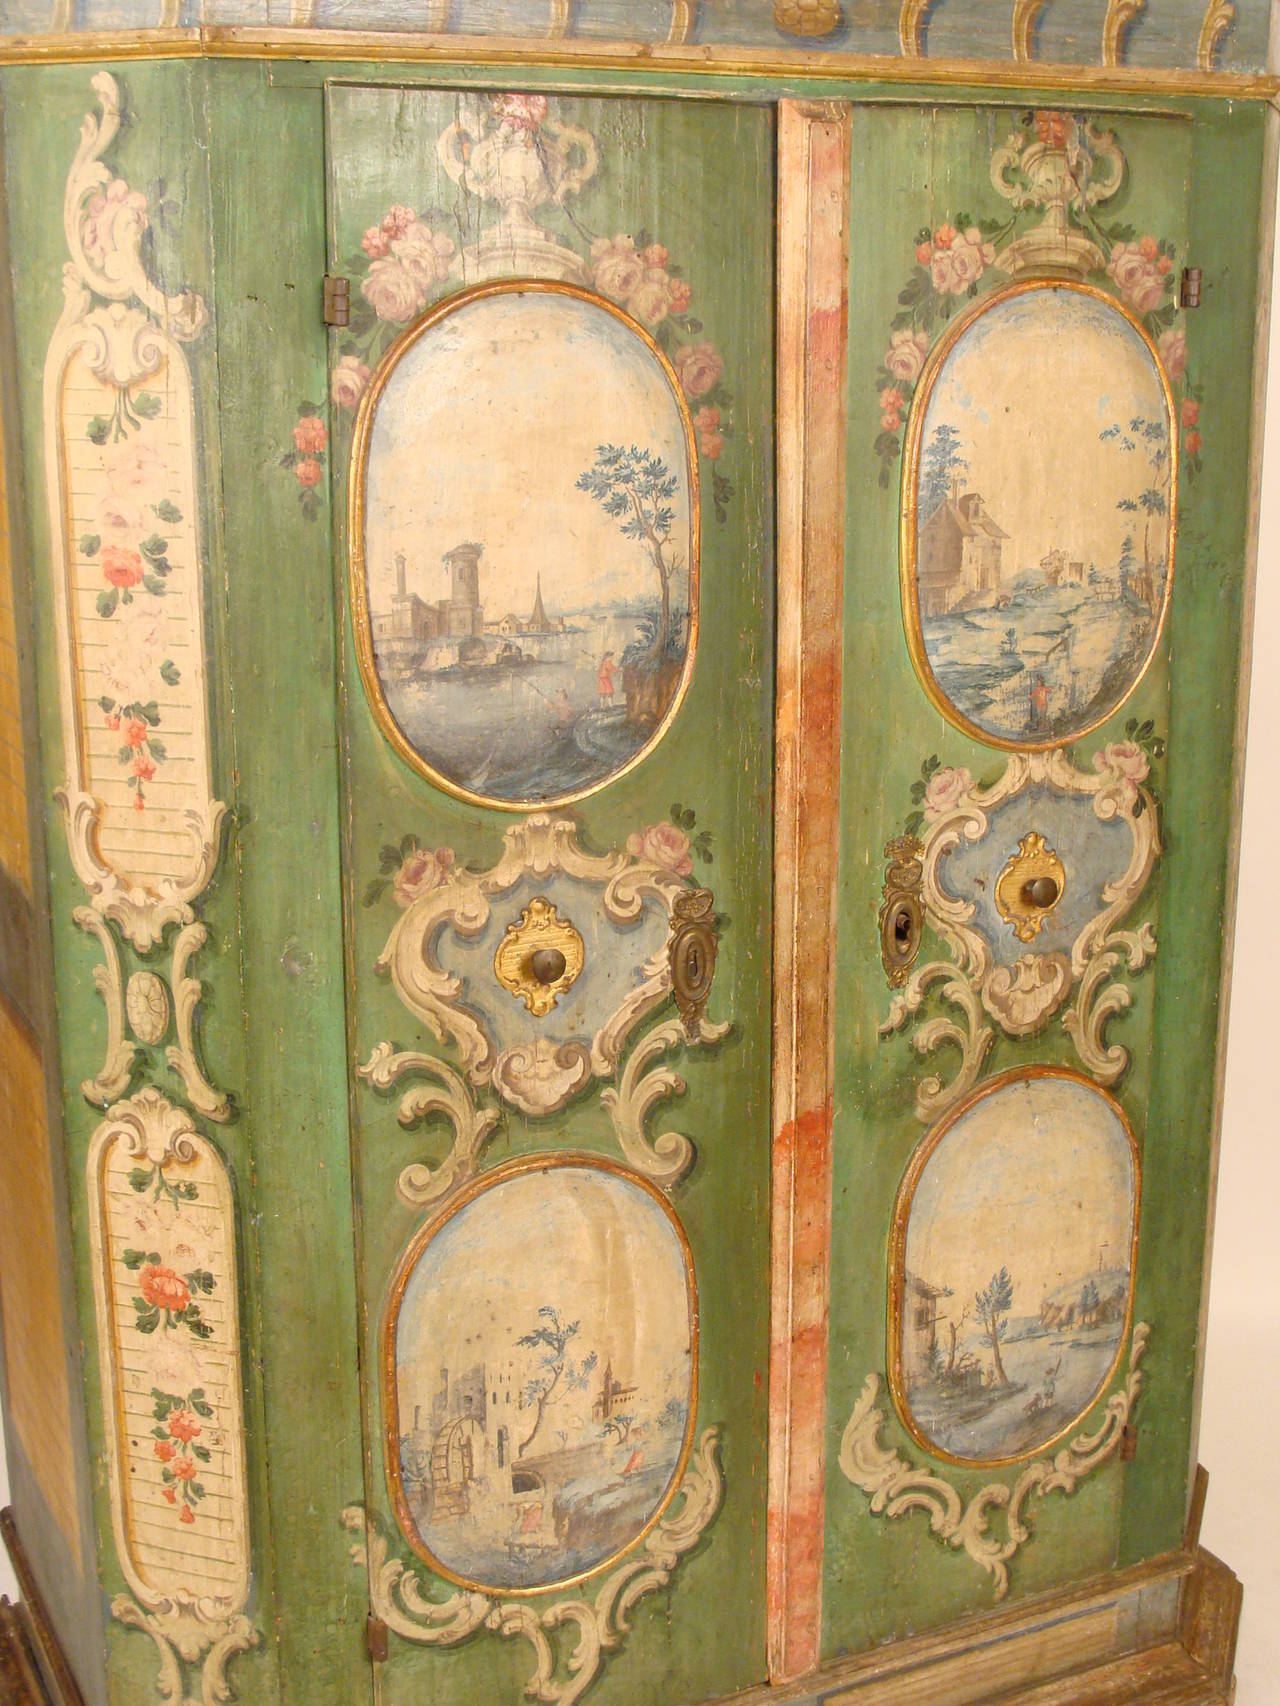 Louis XIV style continental painted armoire, 19th century. This is a very colorful painted armoire featuring two doors with four cartouche framed Capriccio scene paintings.